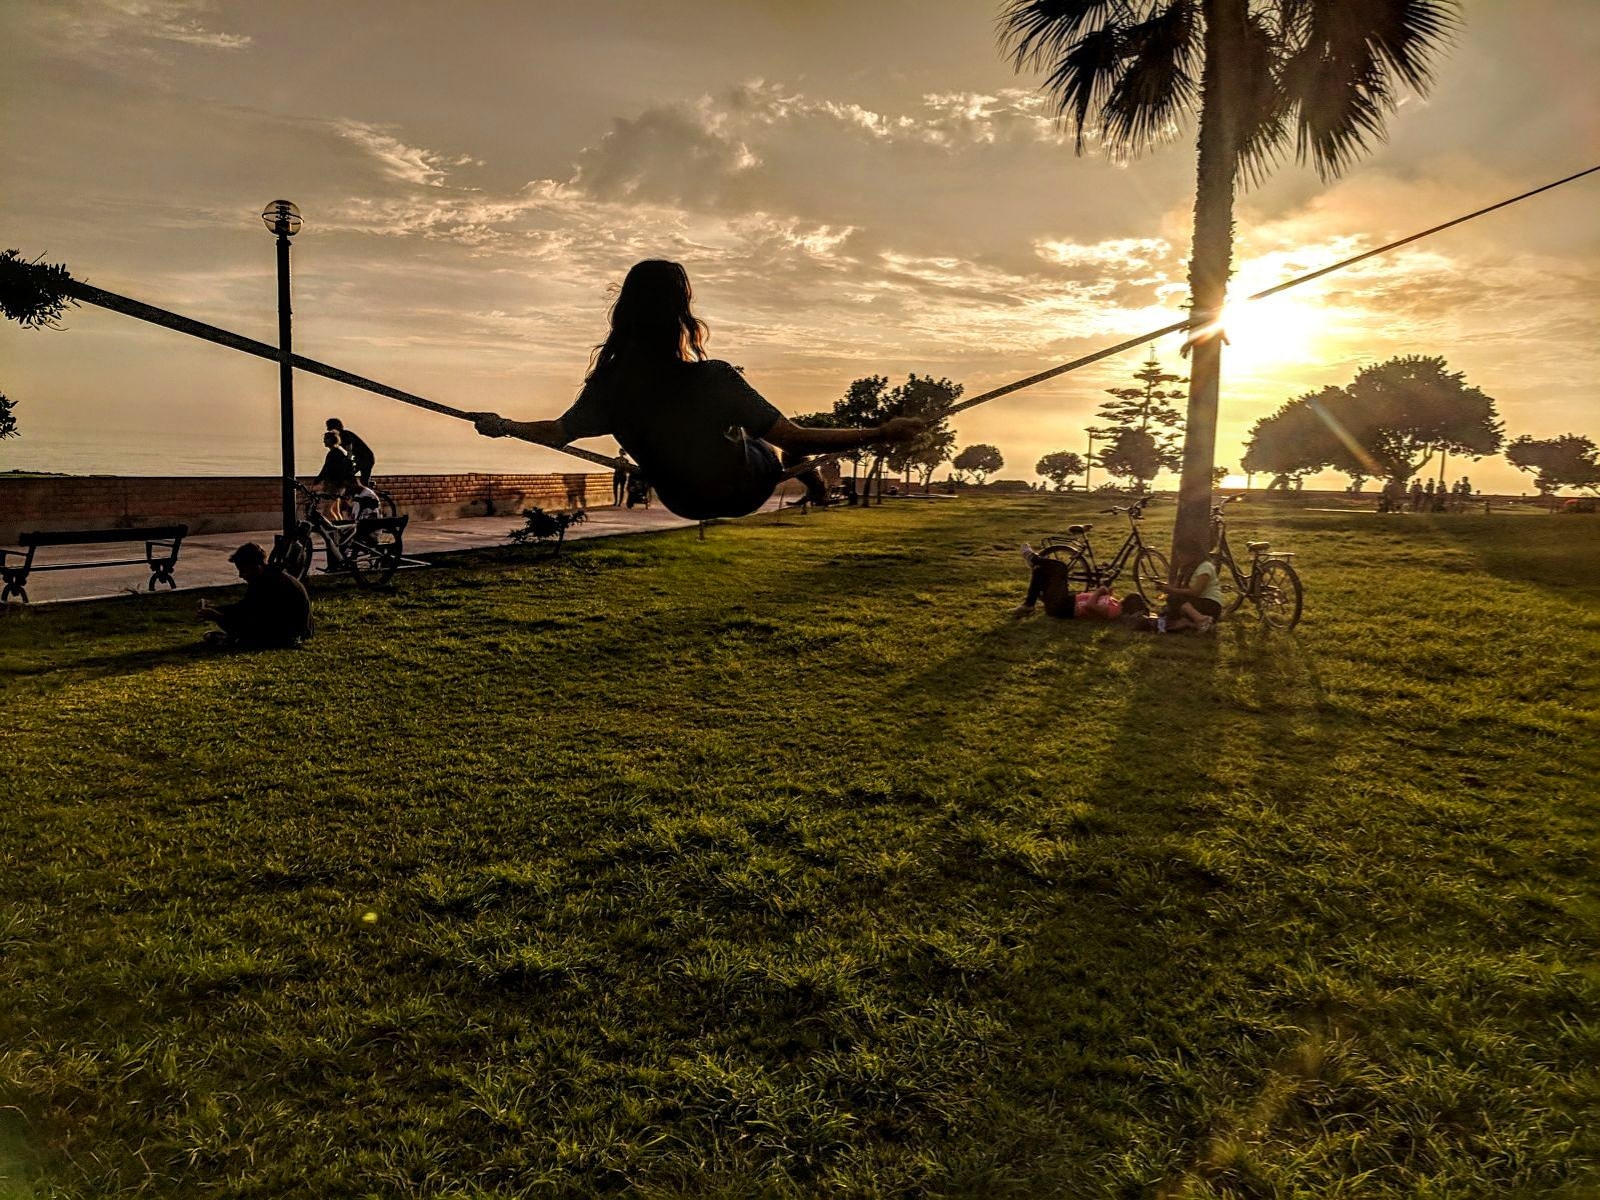 Travel Photography Catching A Sunset On Slackline After Day